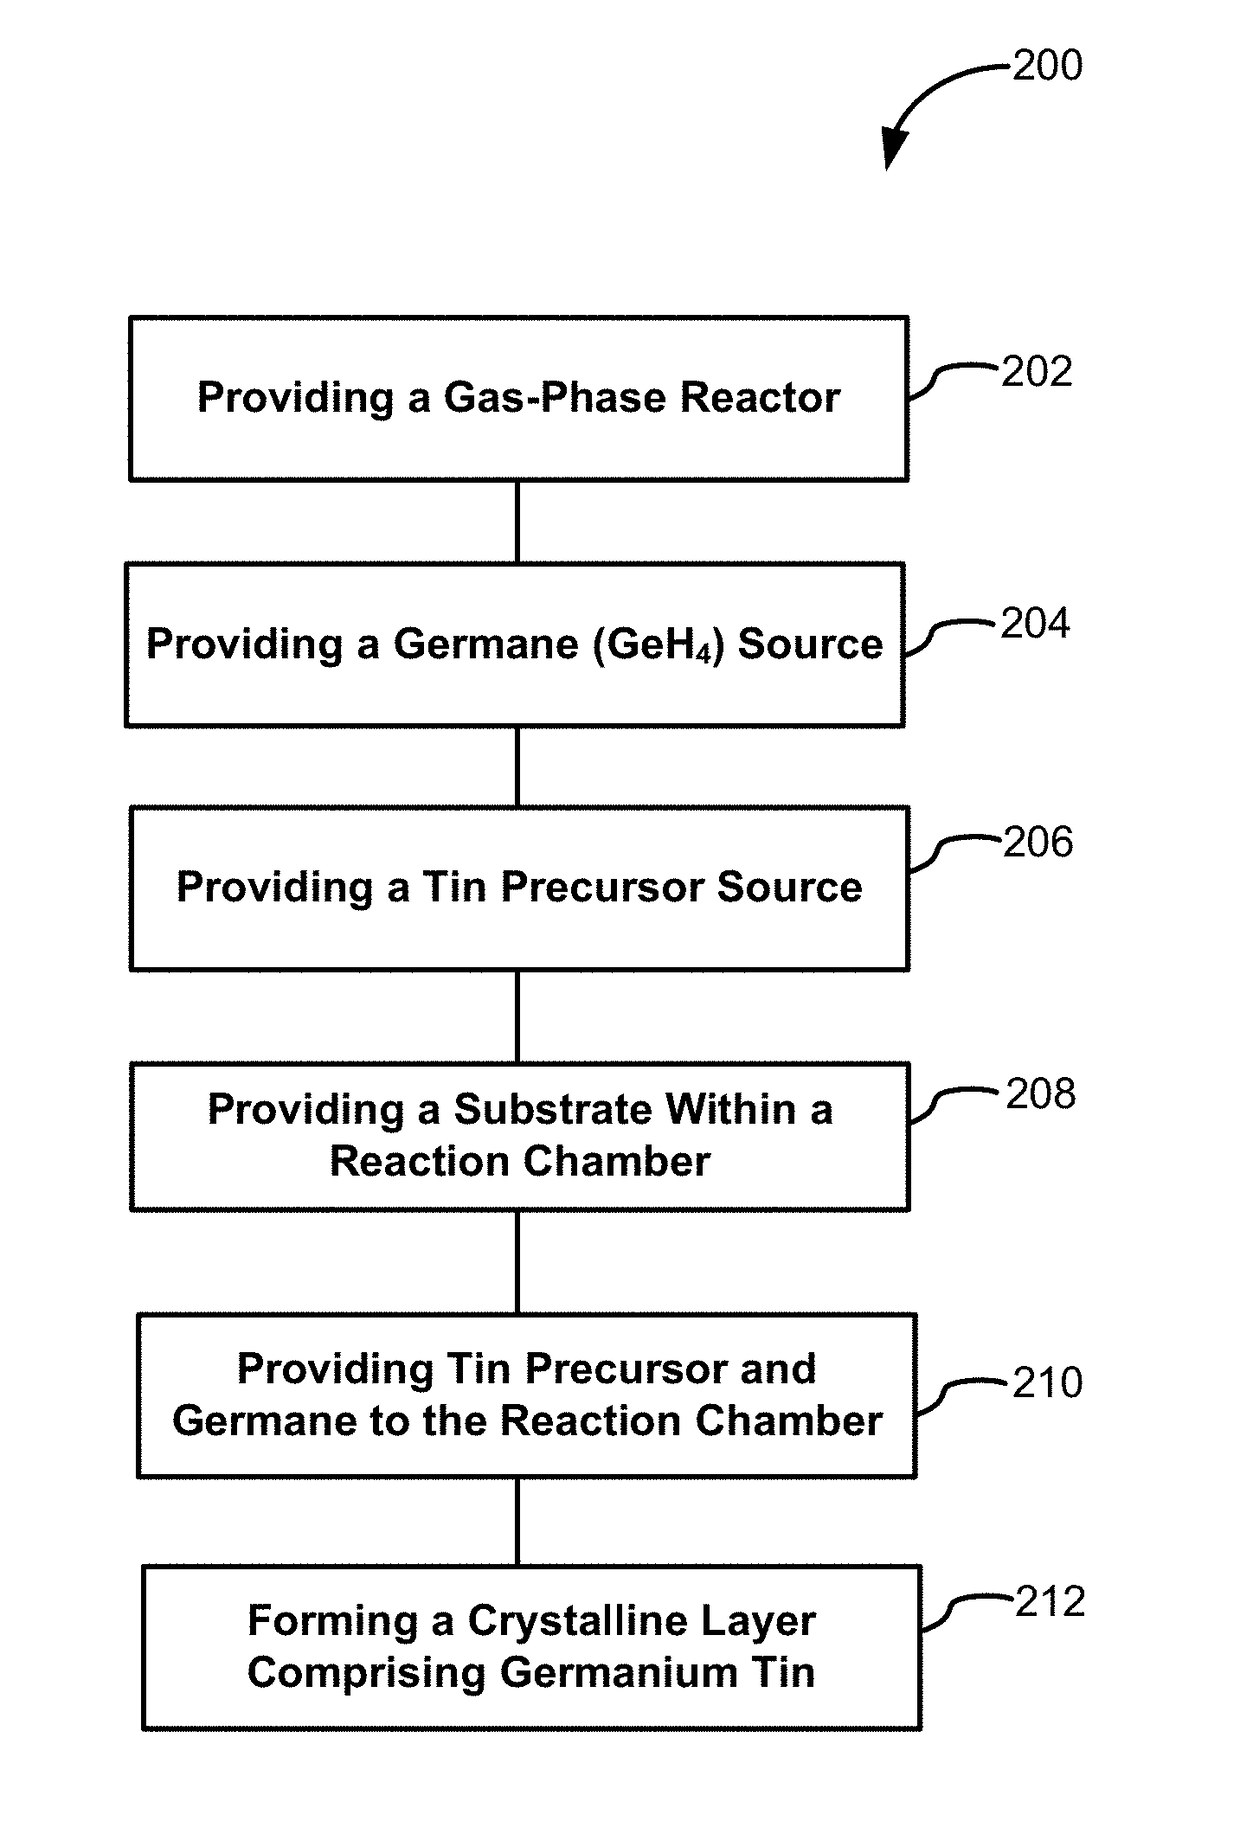 Structures and devices including germanium-tin films and methods of forming same